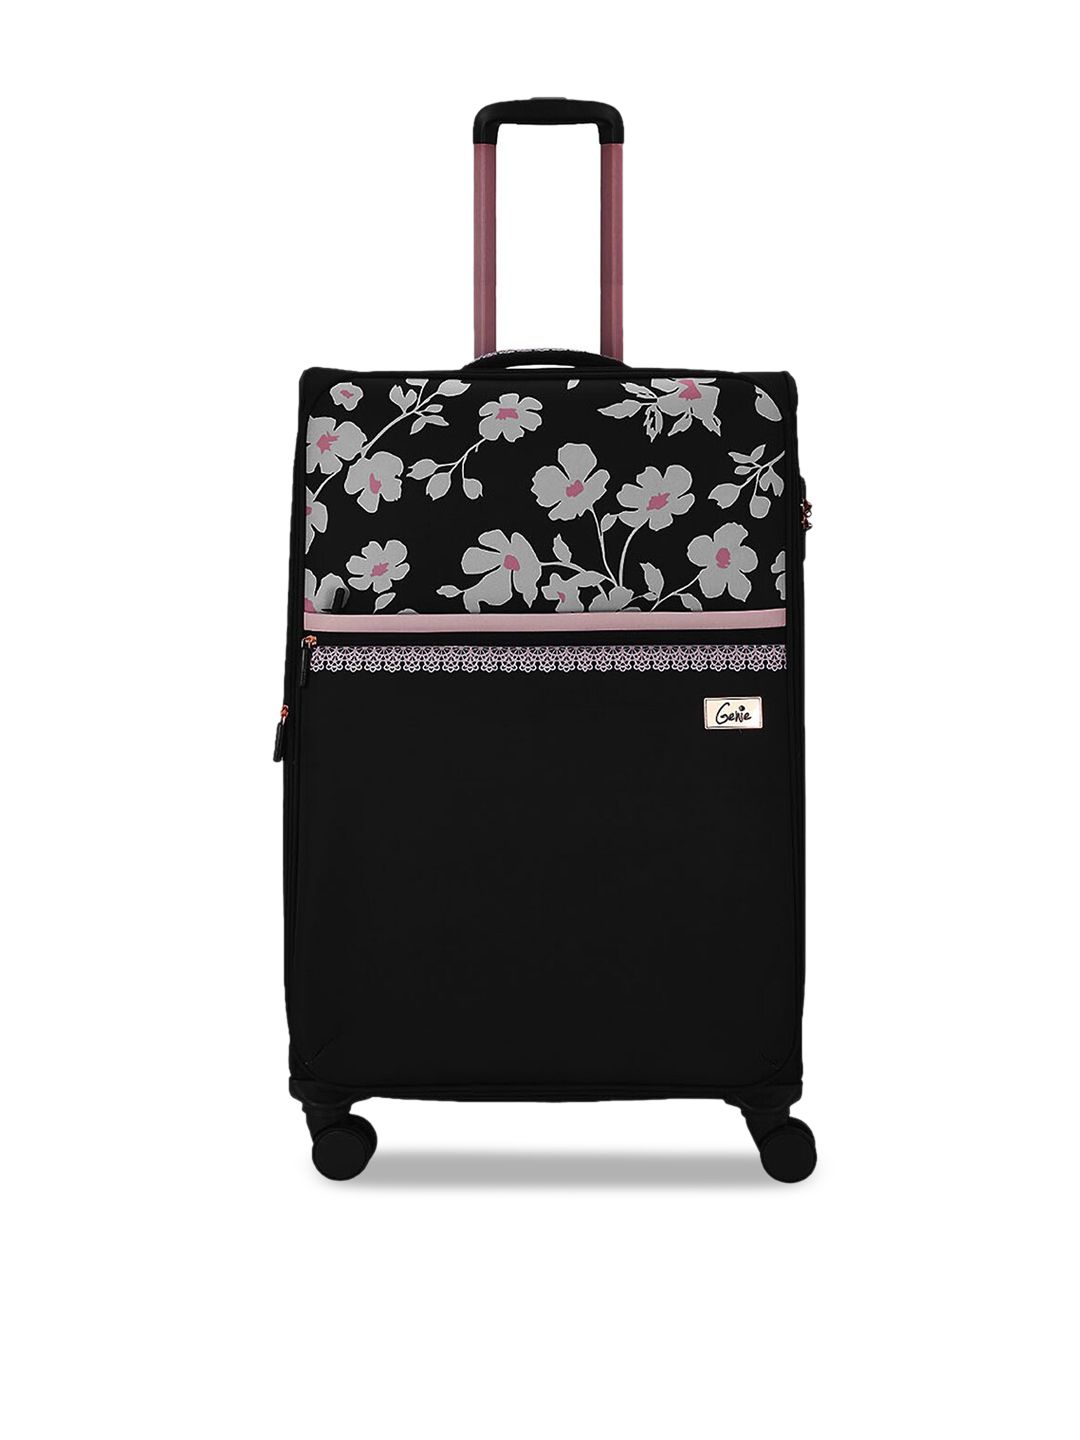 Genie Black & White Printed Soft-Sided Medium Trolley Suitcase Price in India